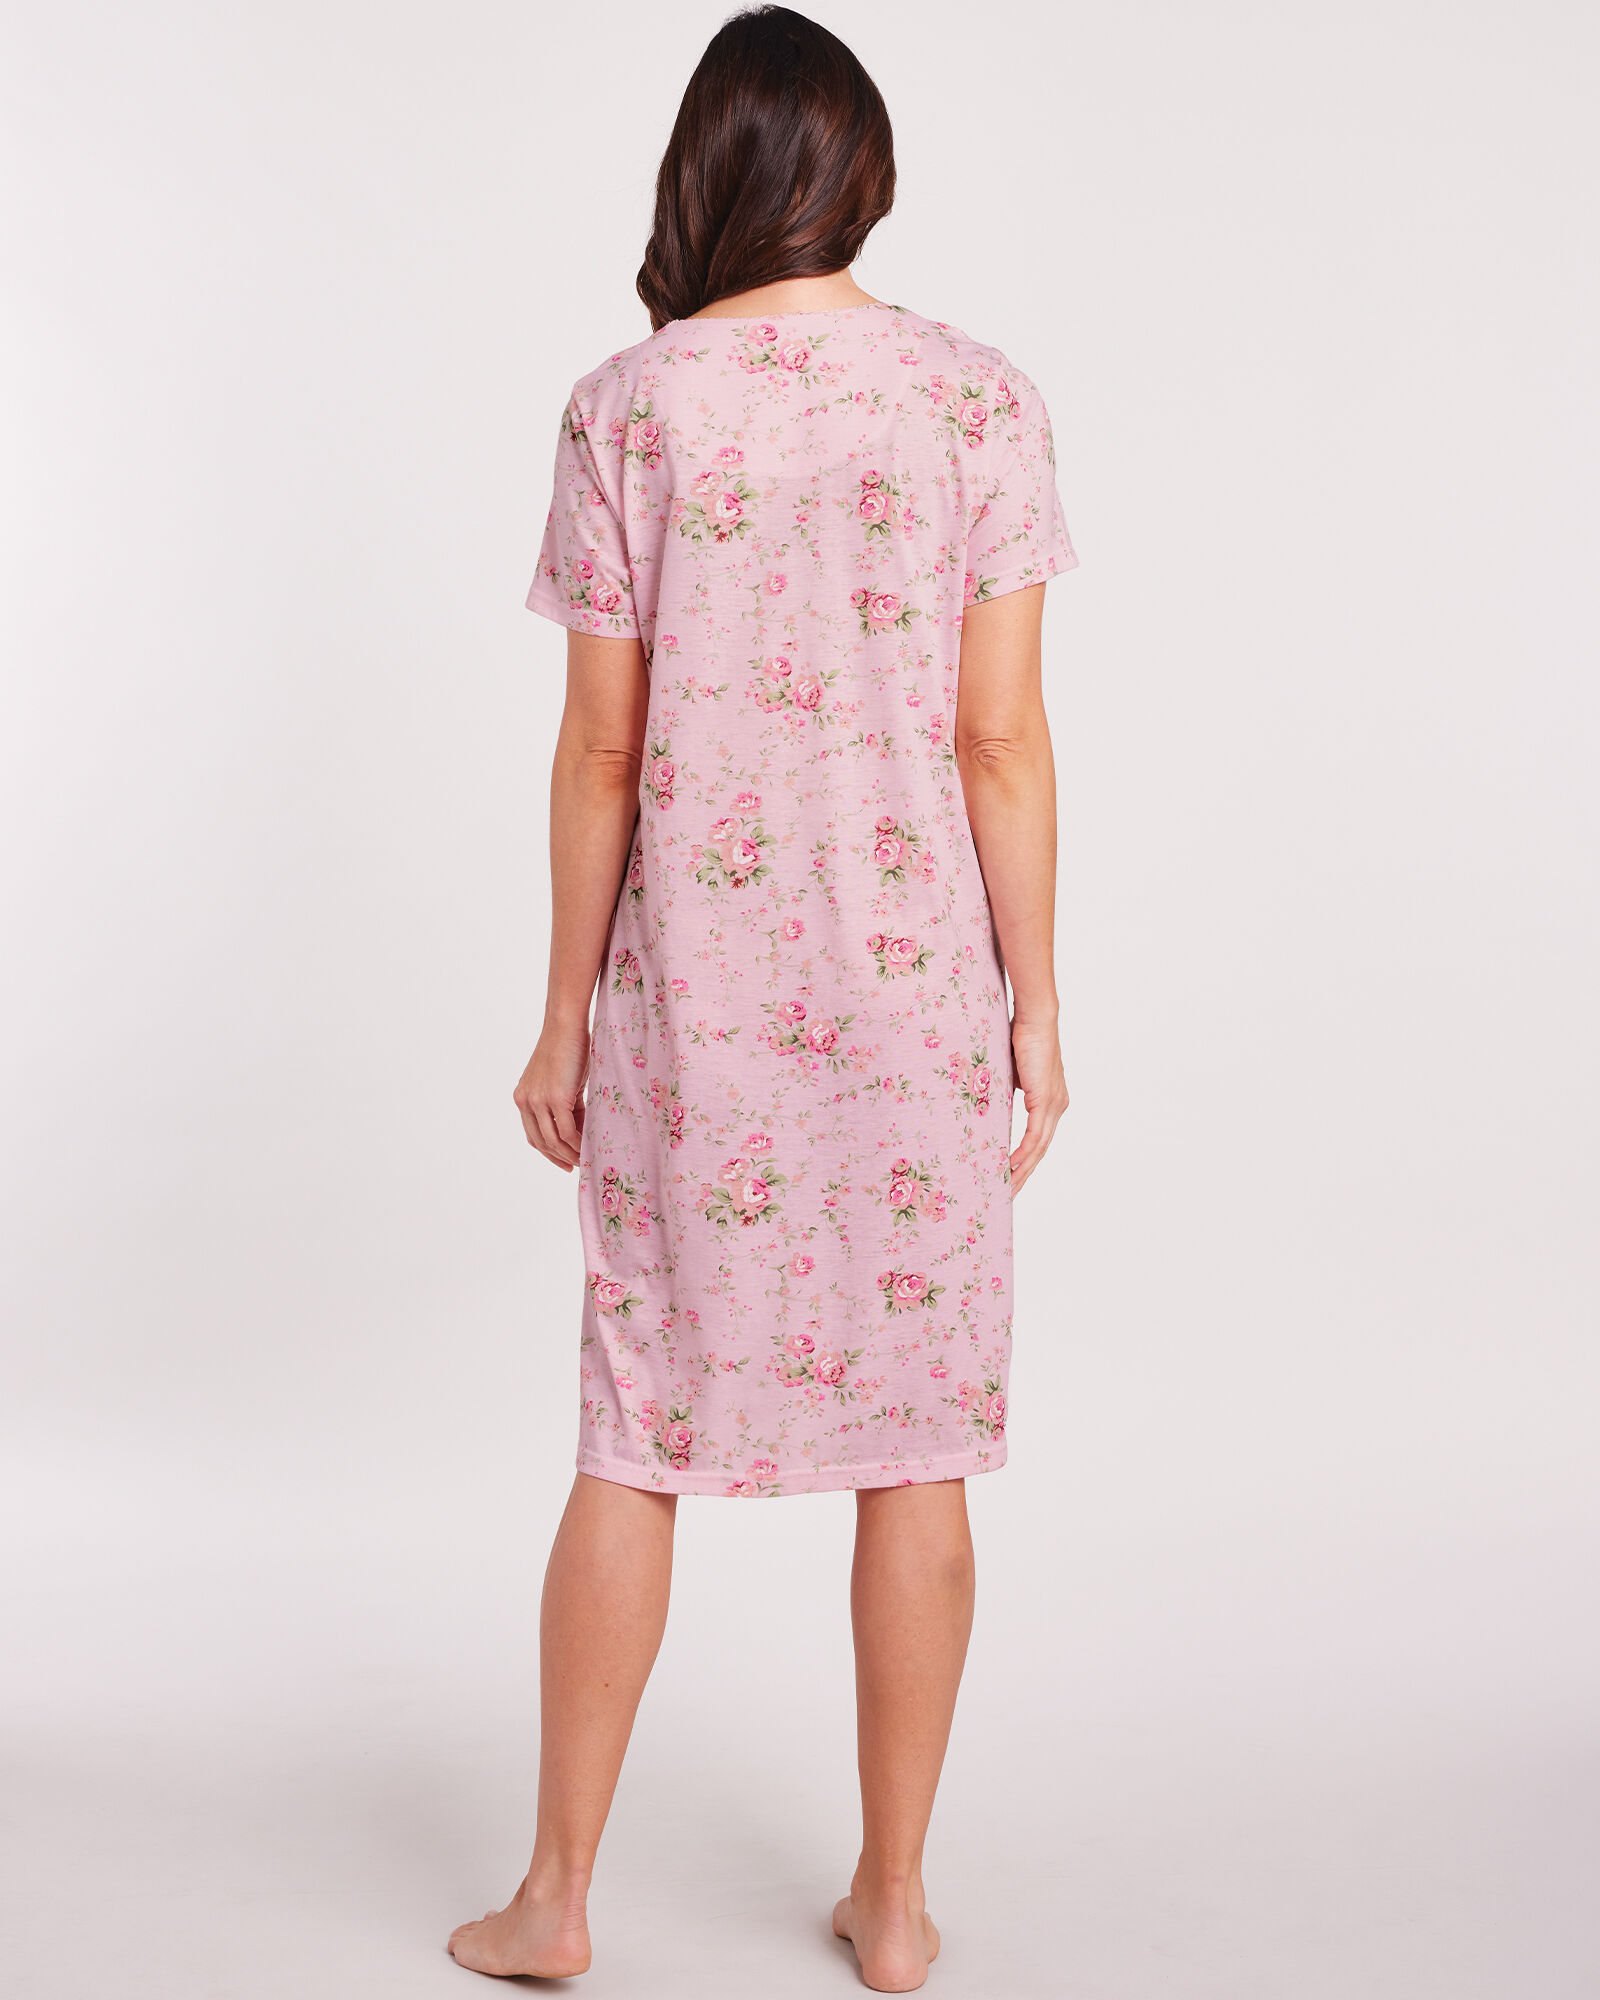 Floral Roses Nightgown